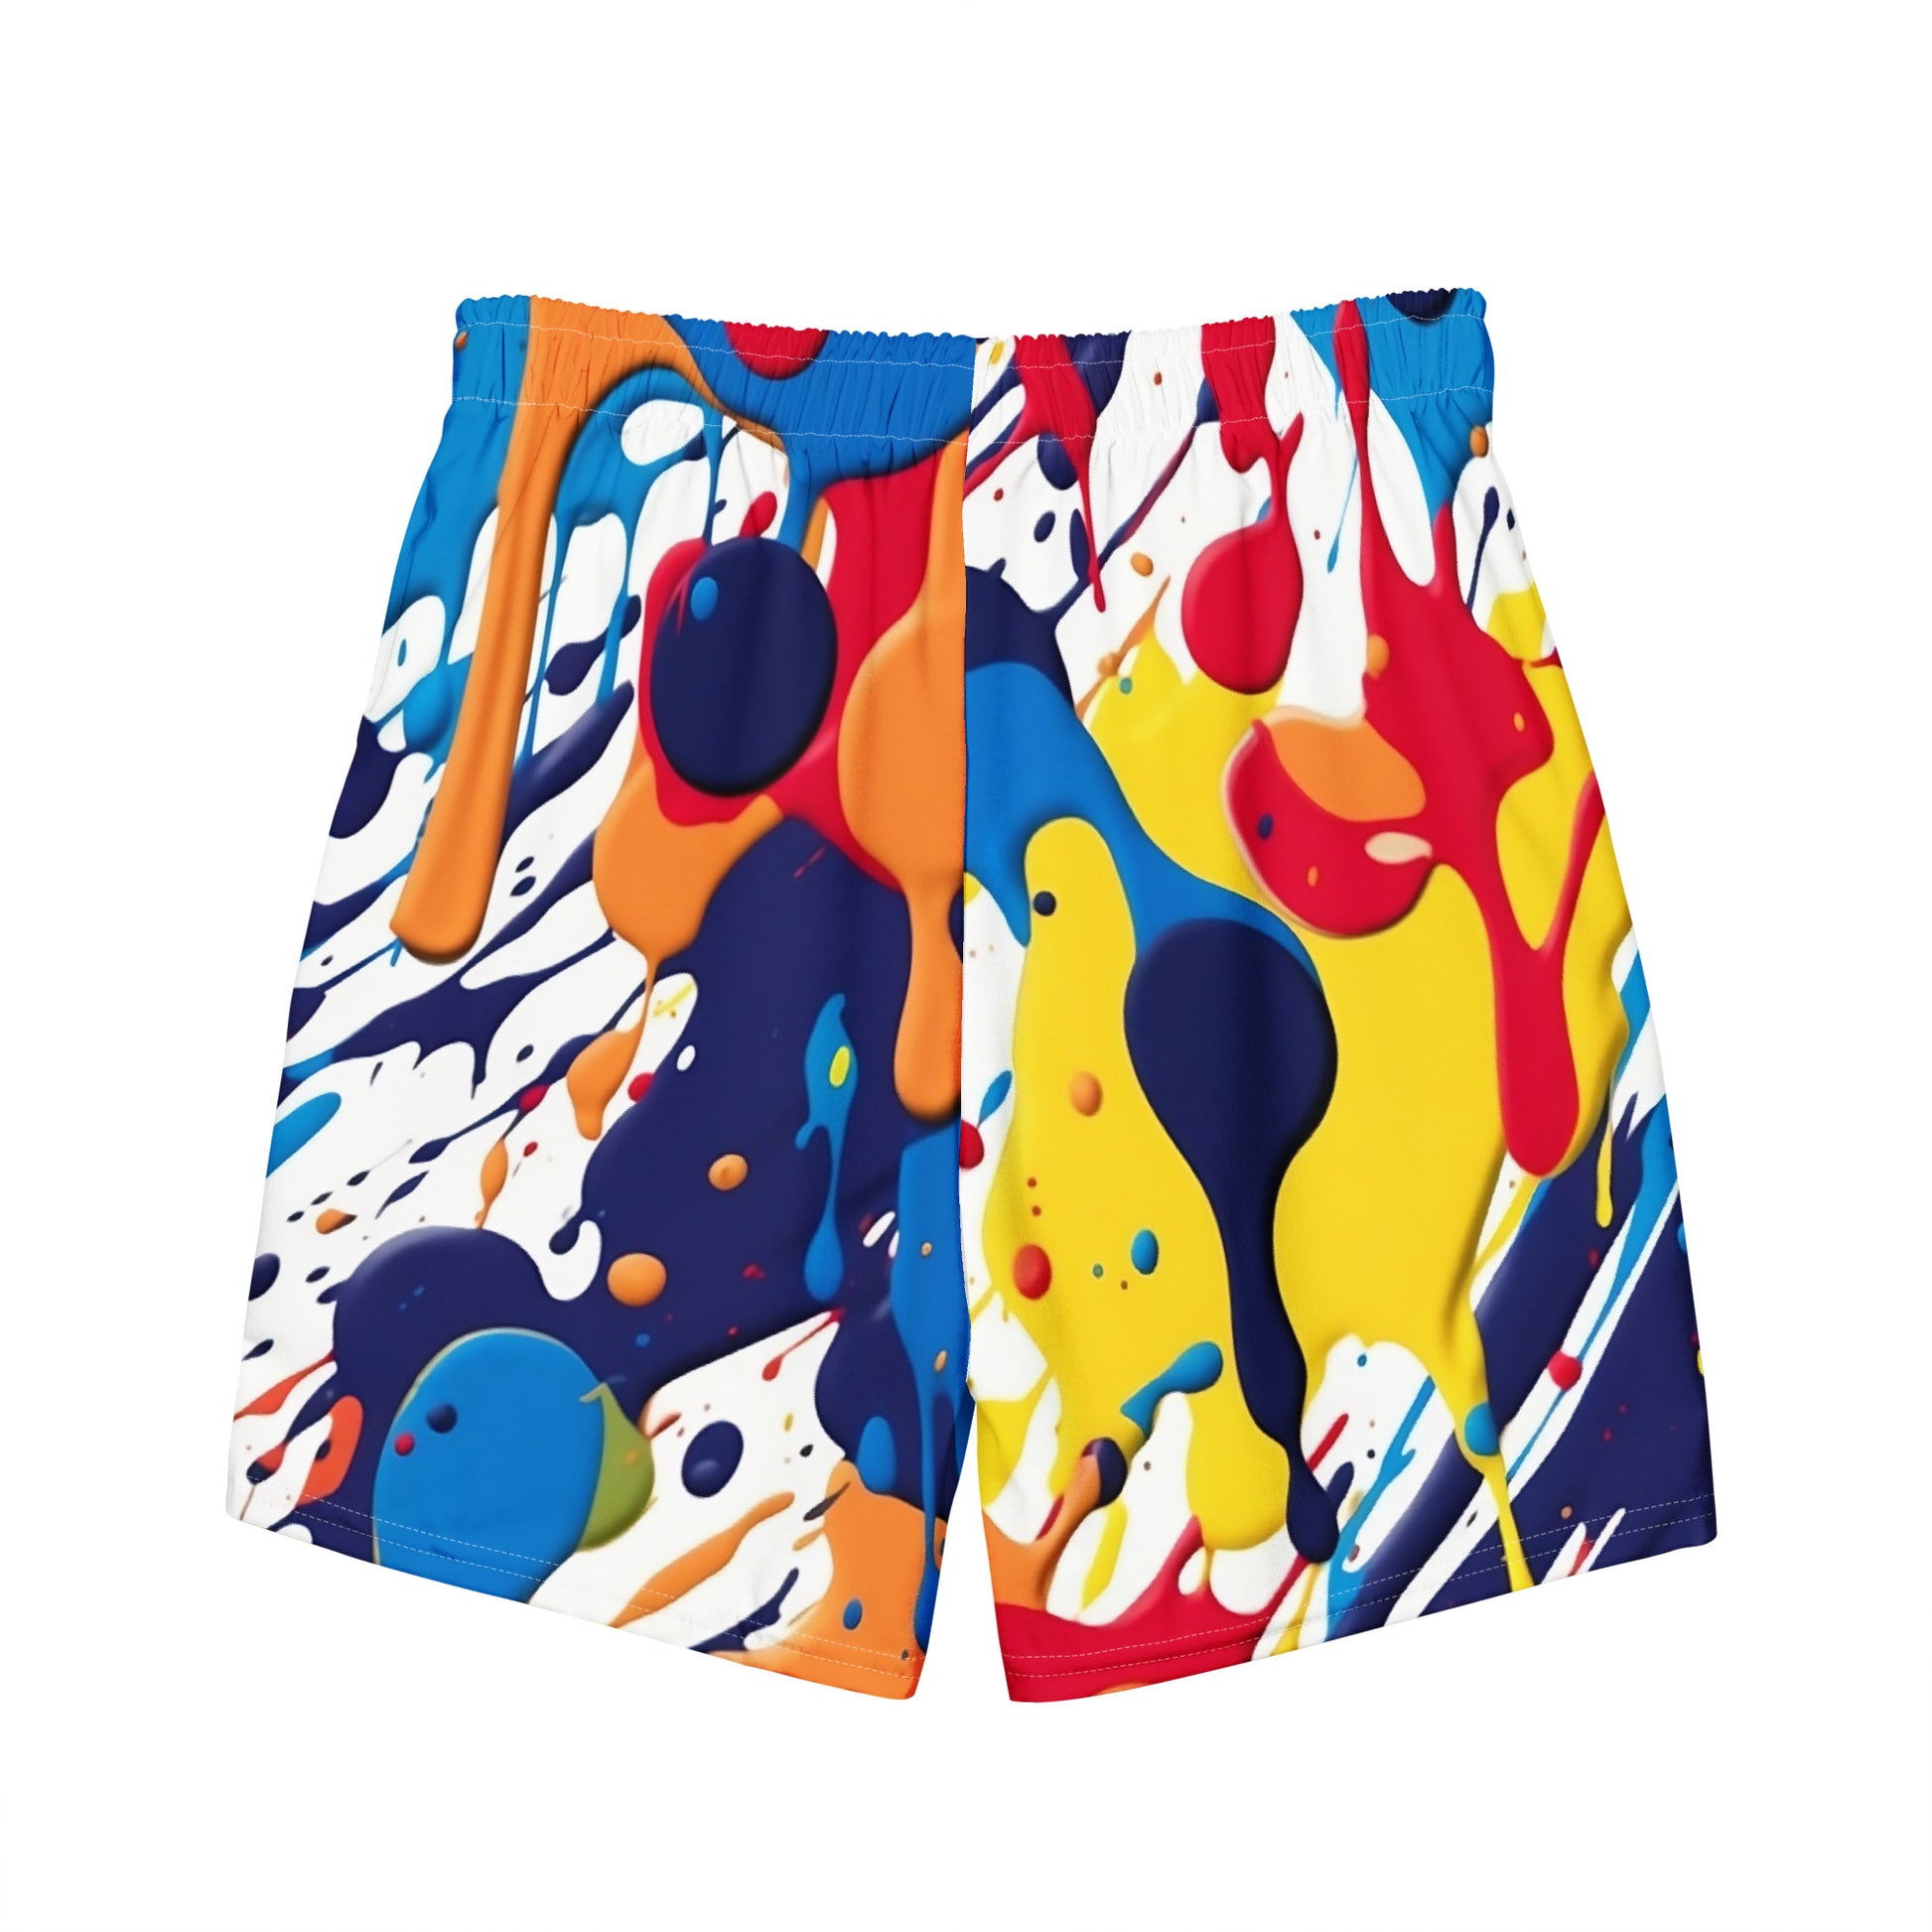 back of paint splashes swim shorts by B.Different Clothing independent streetwear inspired by street art graffiti